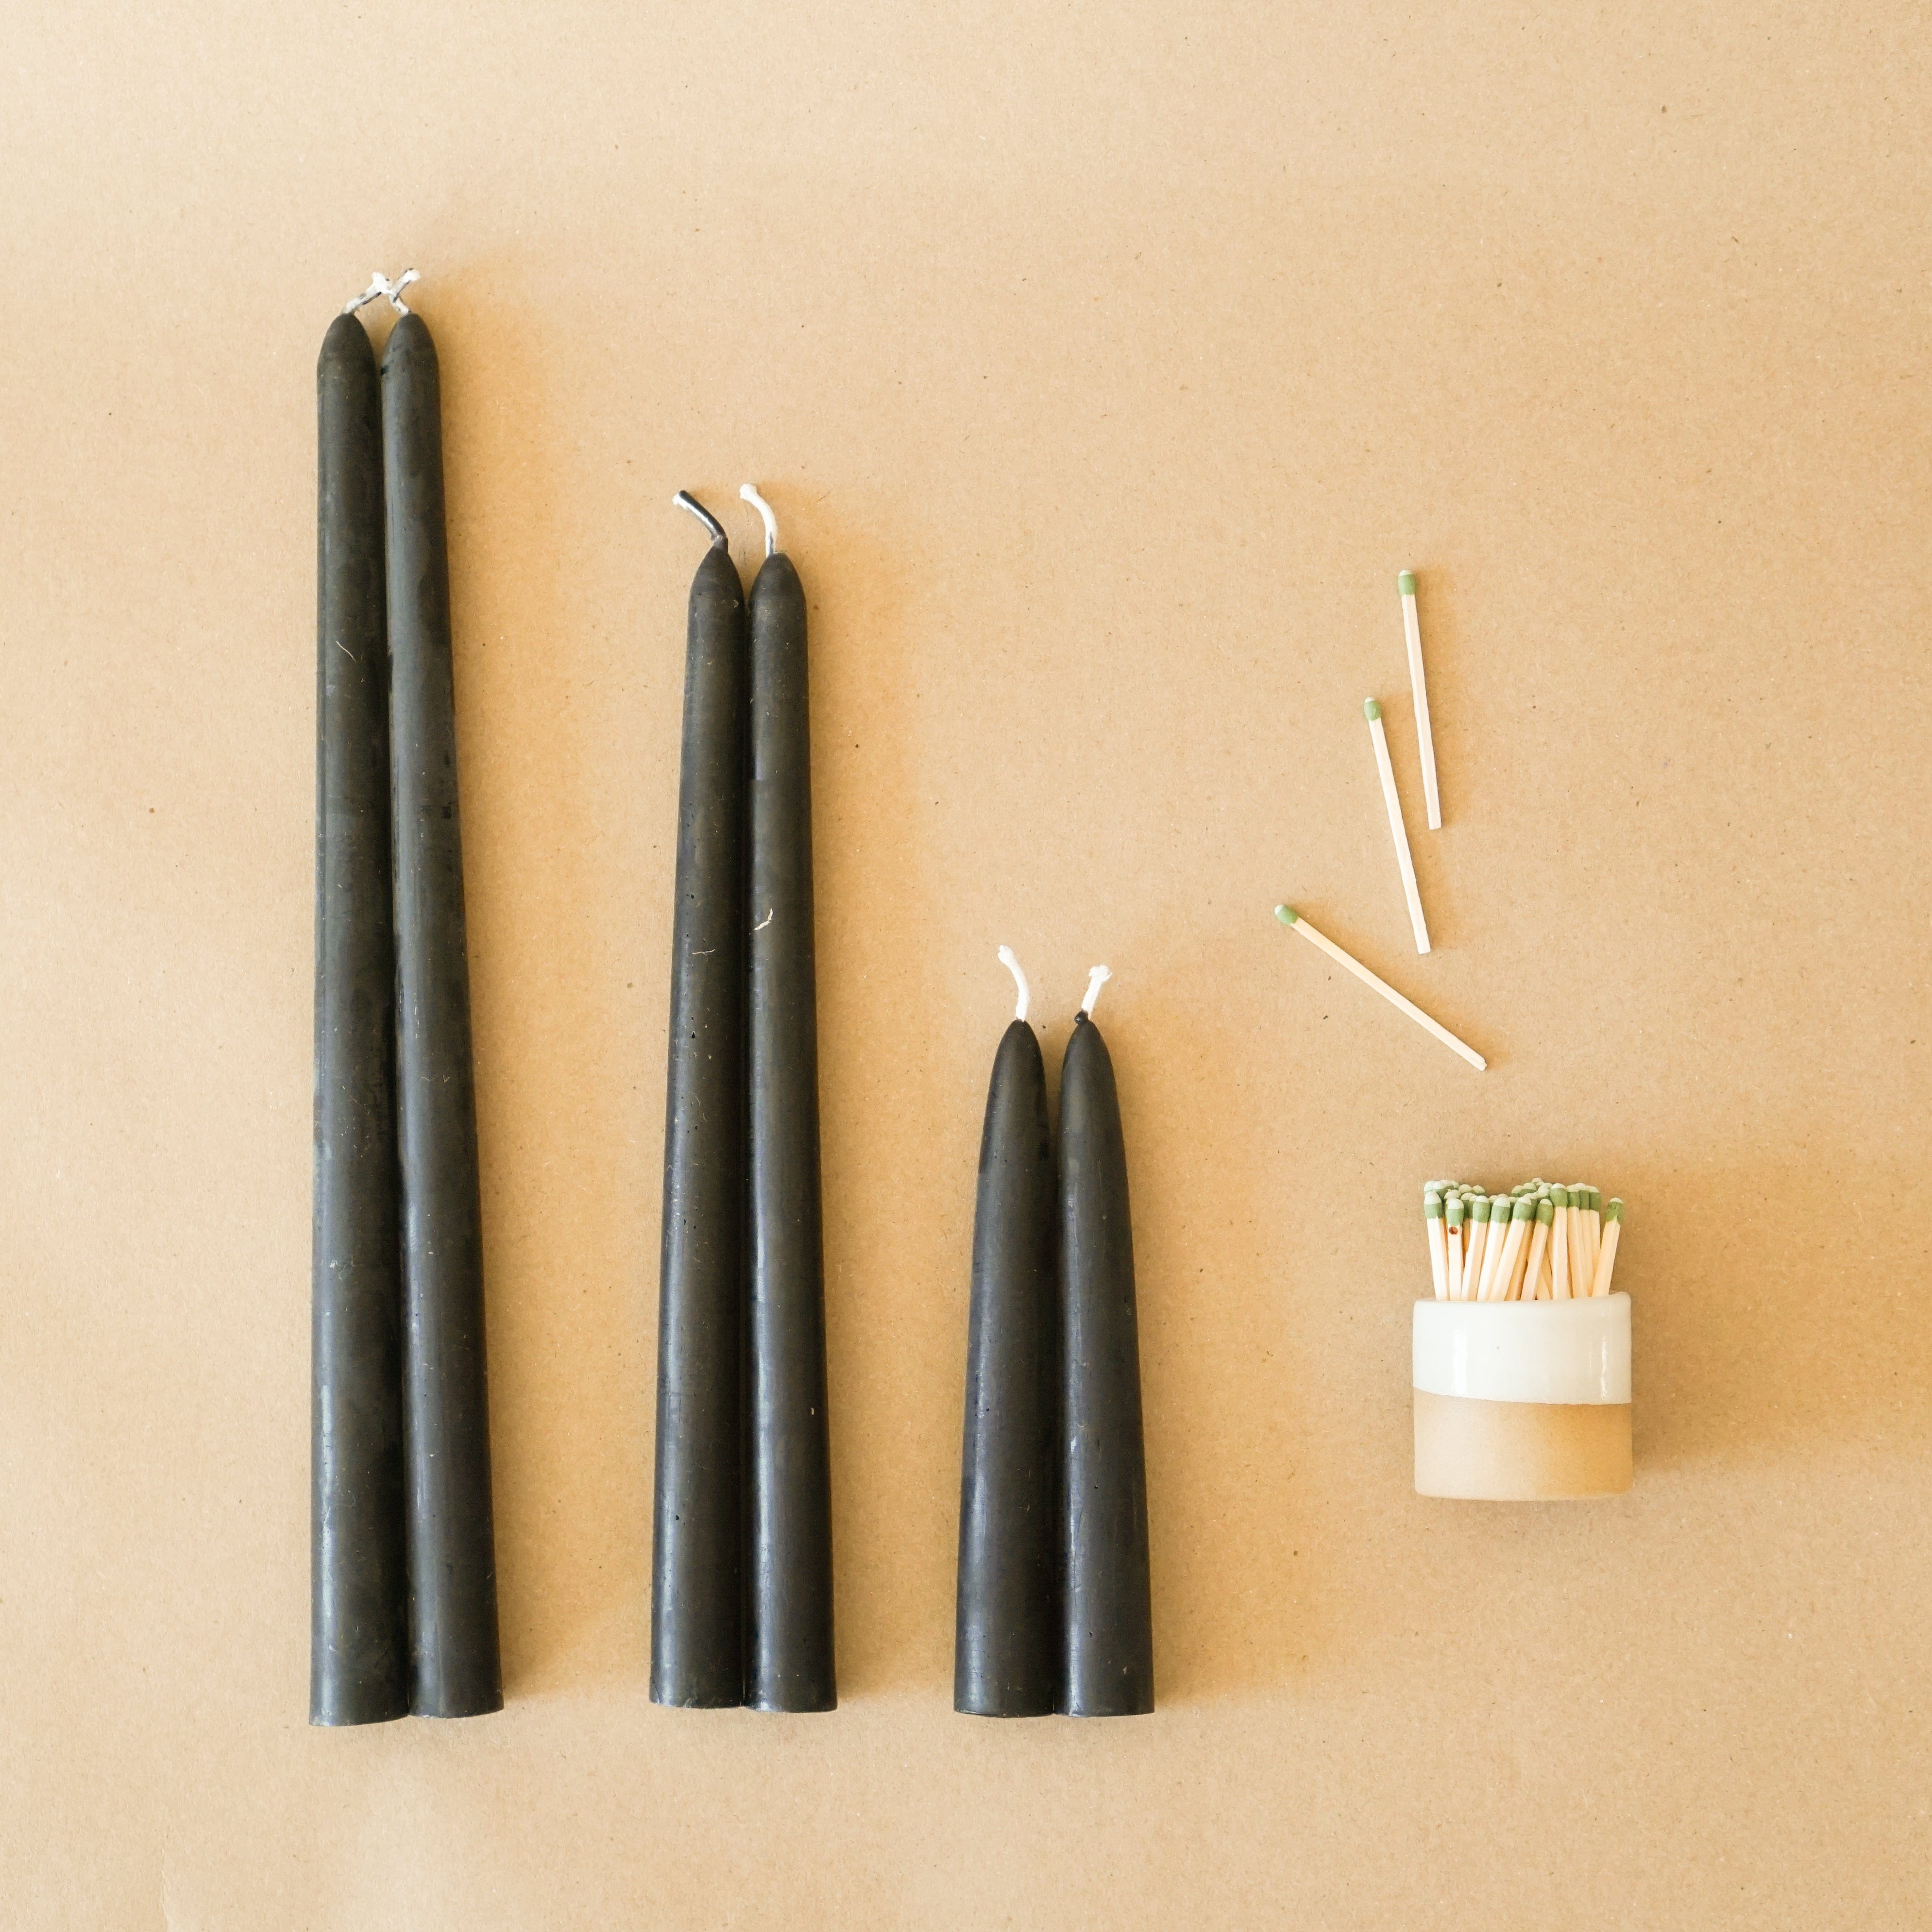 GREENTREE CANDLES Decor 10 Taper Candles by Greentree - Black